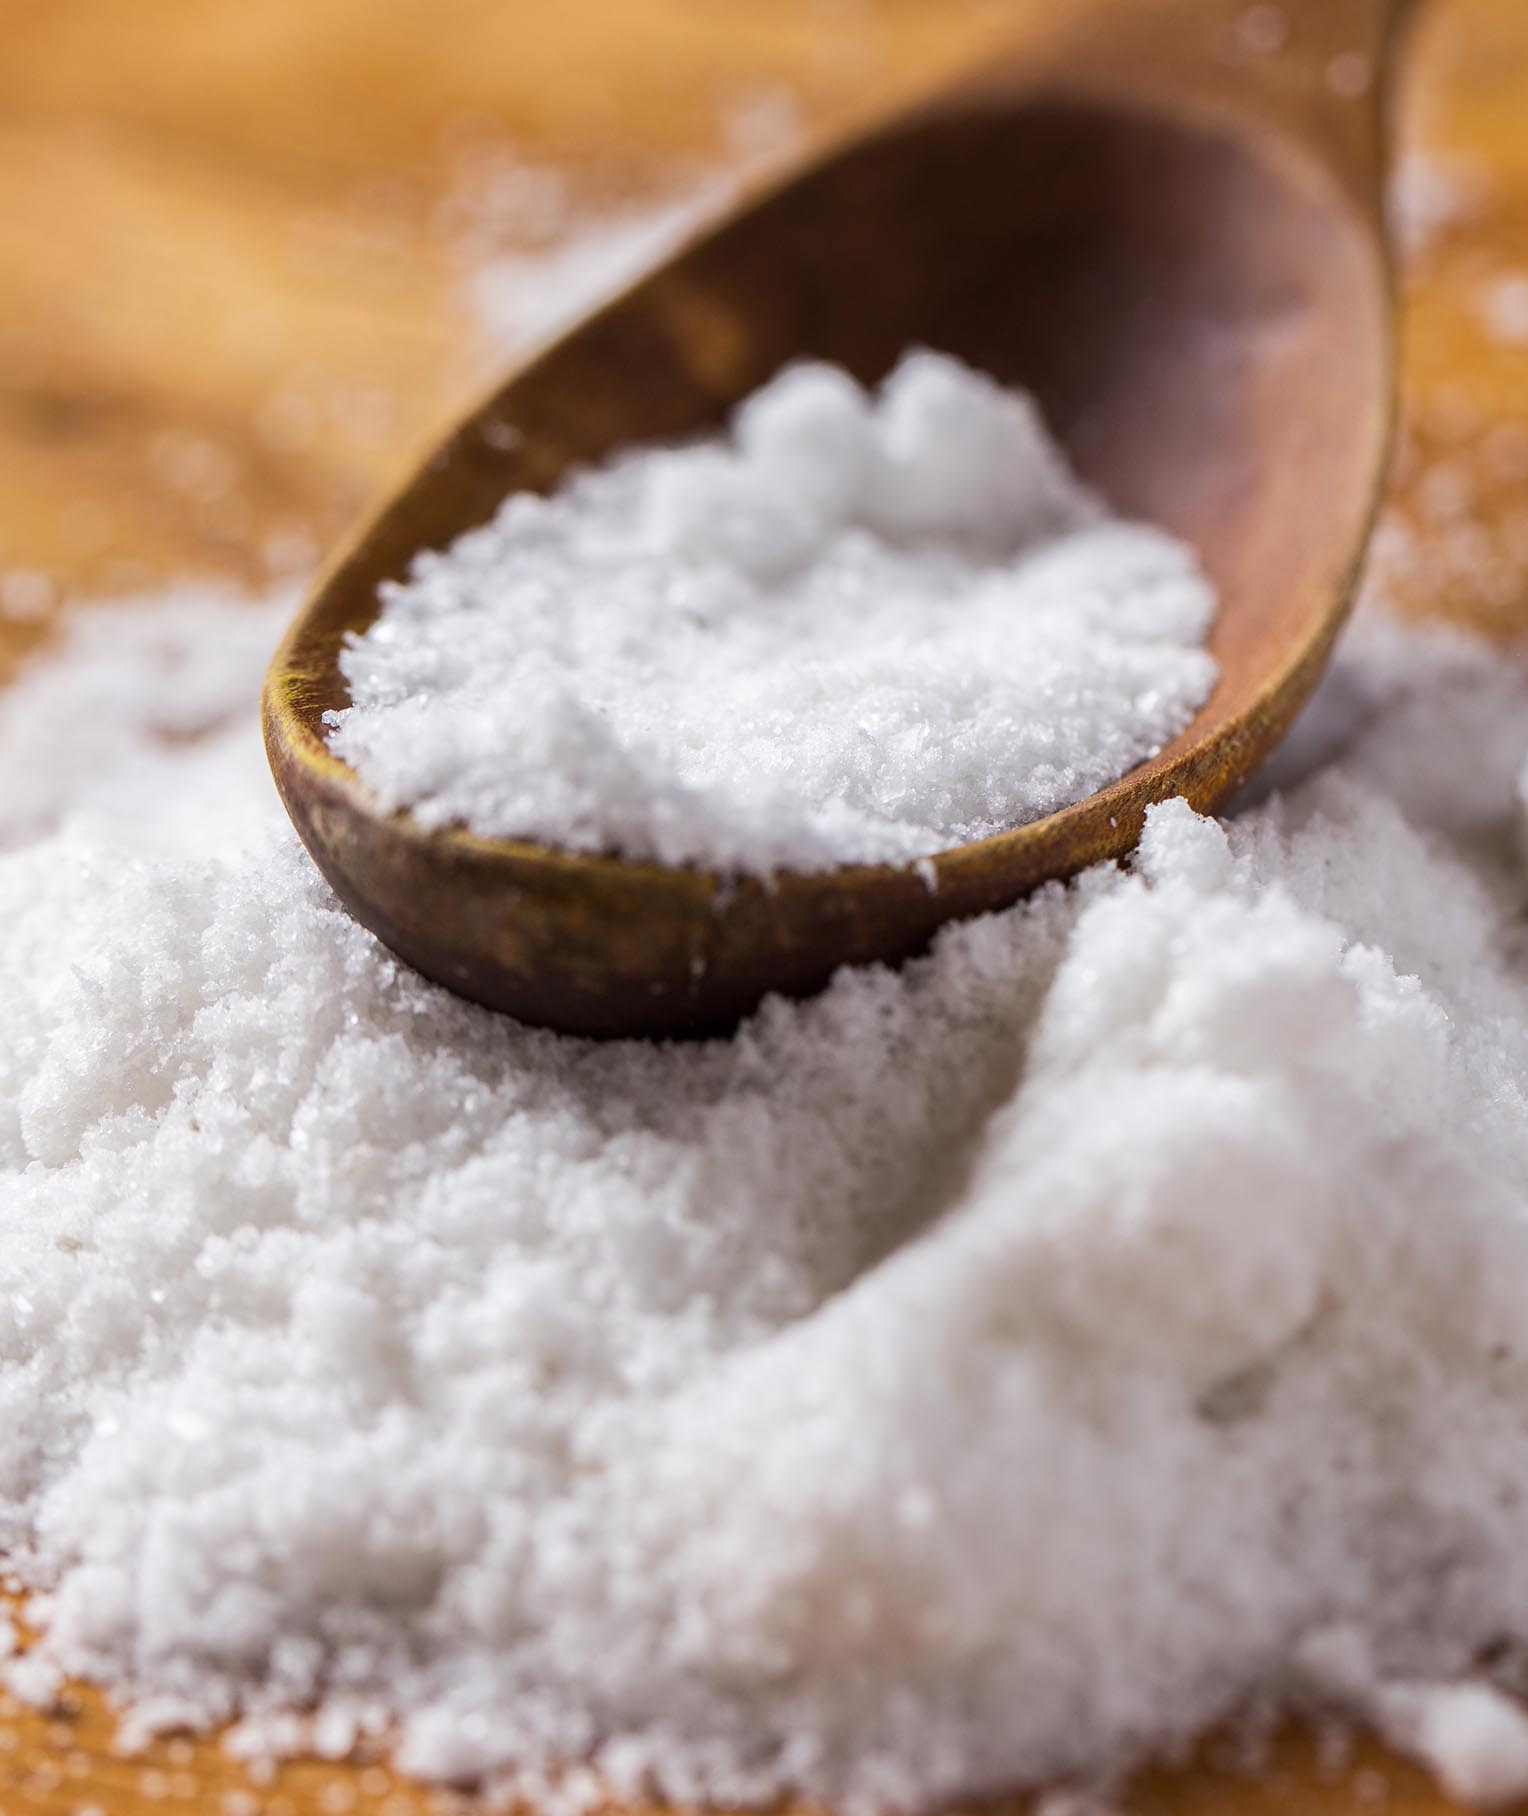 12 Foods Highest in Sodium and Why You Should Avoid Them